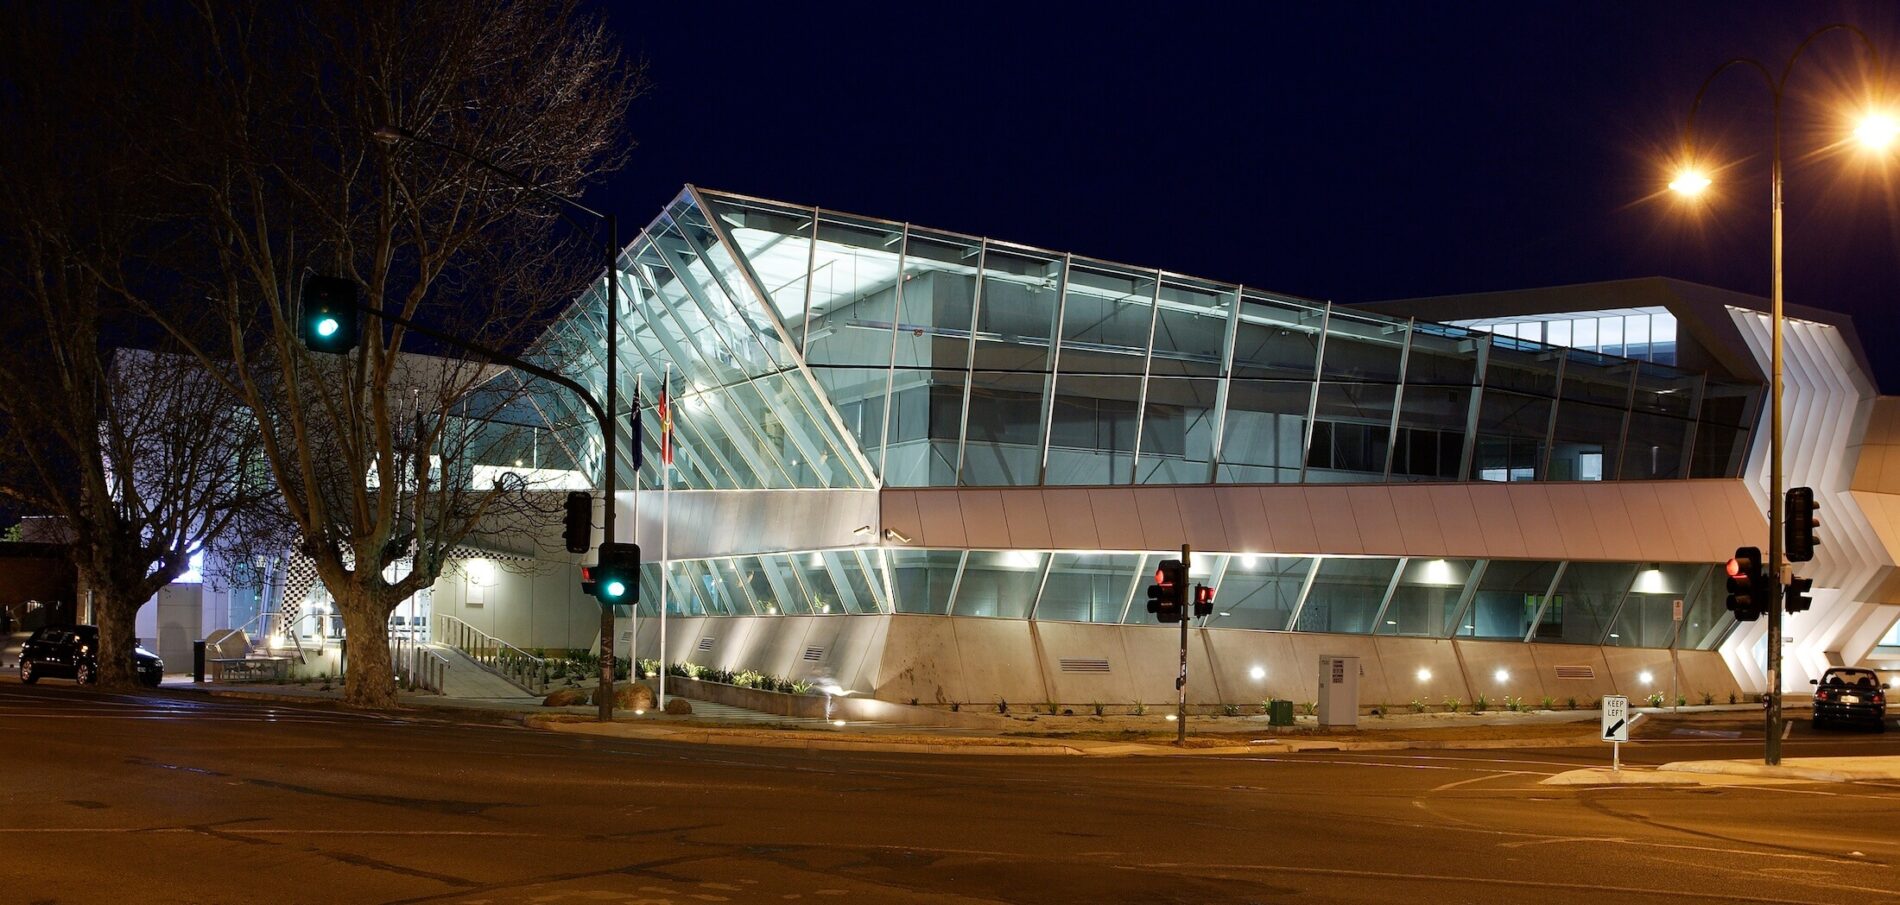 Corner view of angled glazed double facade on large police complex, tree to the left, pictured at night